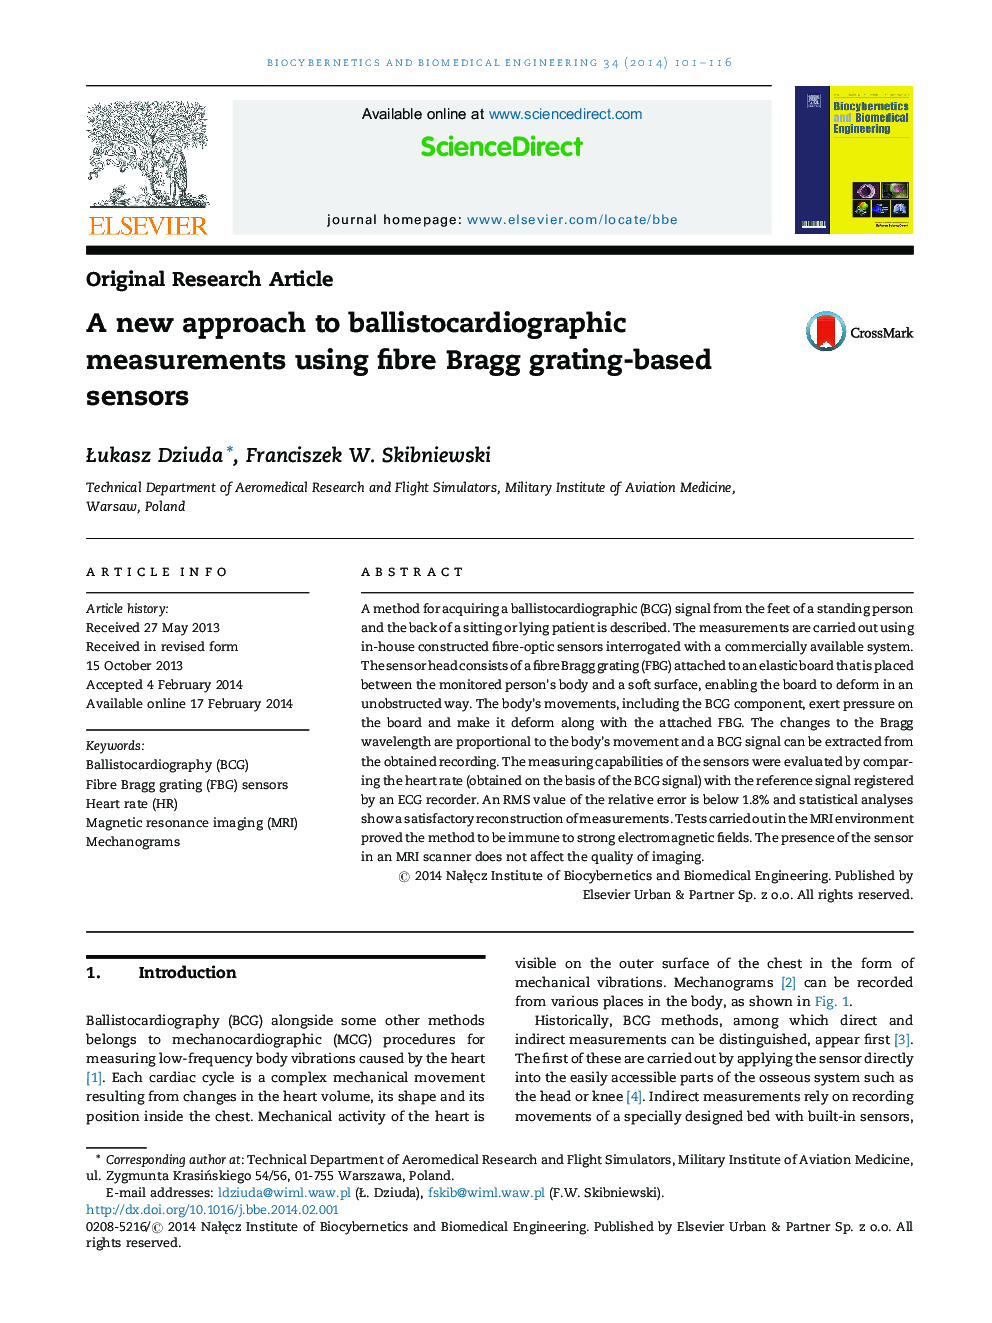 A new approach to ballistocardiographic measurements using fibre Bragg grating-based sensors